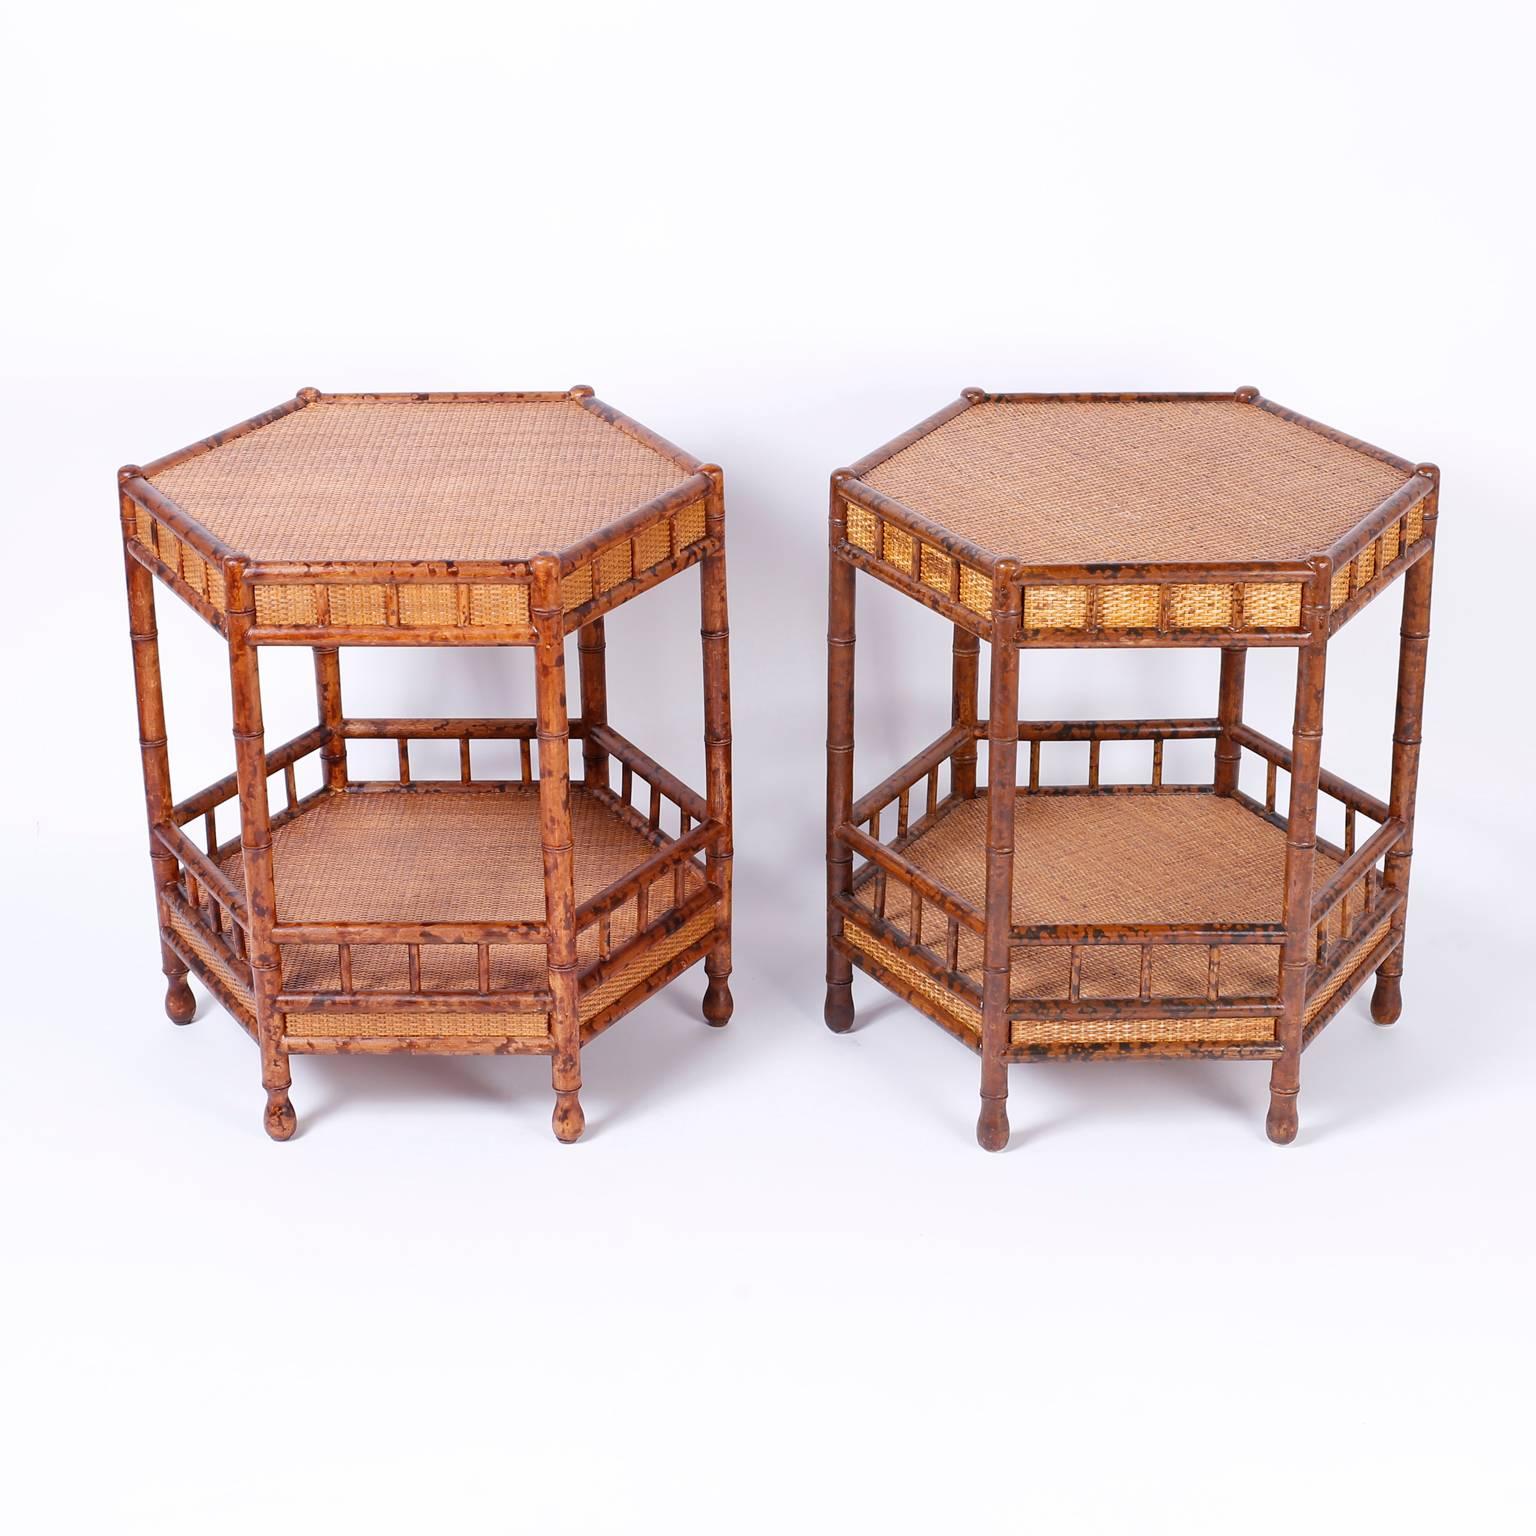 Handsome pair of two-tiered end tables or night stands crafted with turned wood faux bamboo or rattan and wicker or grasscloth that are an example of modern and traditional influences successfully combined.